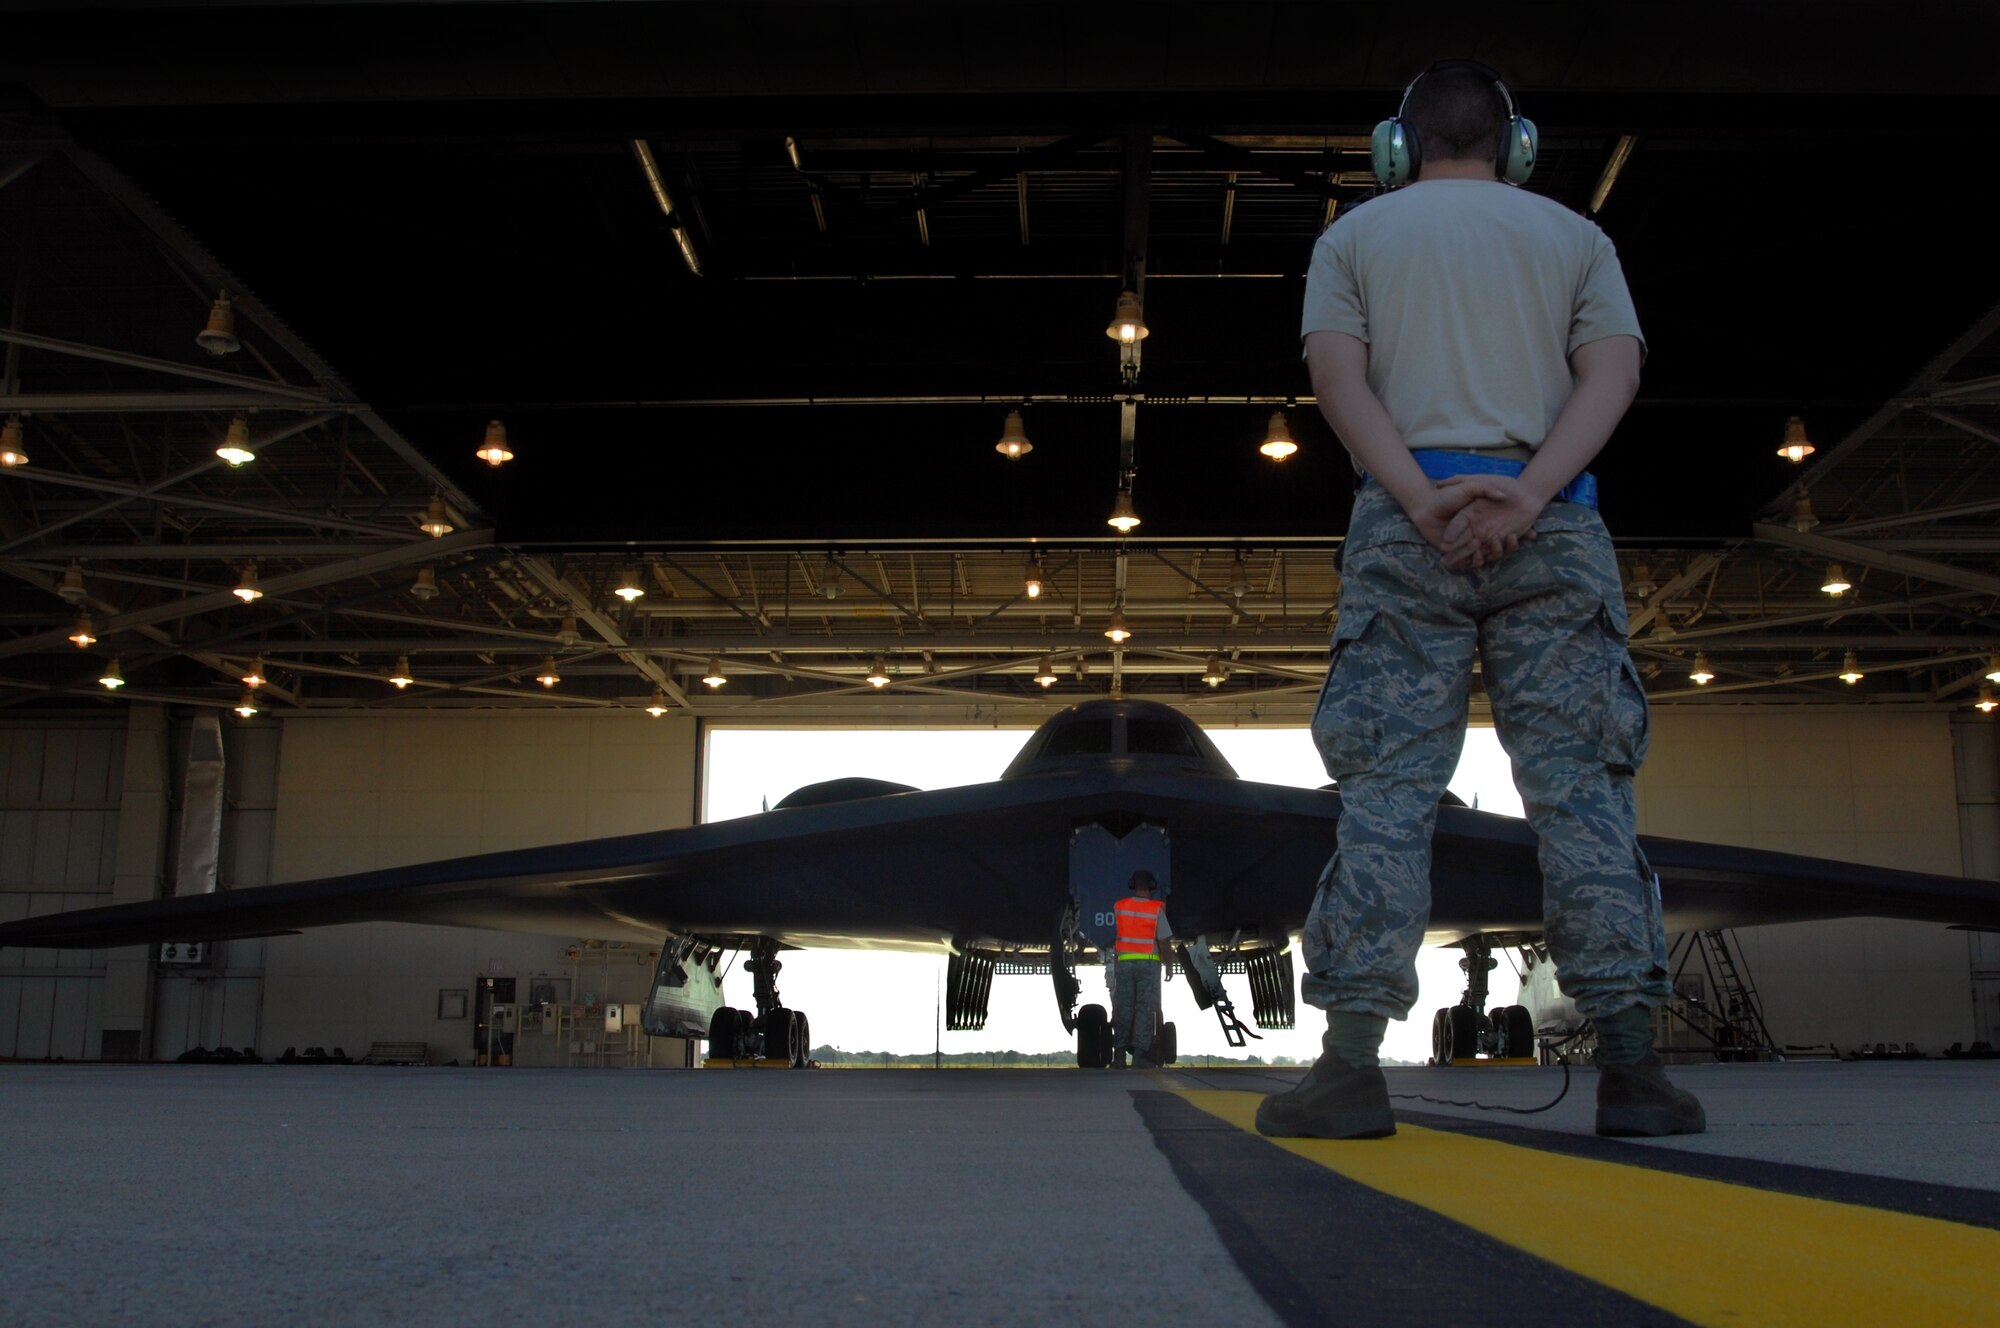 WHITEMAN AIR FORCE BASE, Mo. – Senior Airman Douglas Anthony, 509th Aircraft Maintenance Squadron crew chief, stands prepared to marshal a B-2 Spirit out of a hanger for takeoff, Aug. 22, 2009.  Twenty B-2 Spirit aircrafts are assigned to the 509th Bomb Wing. The B-2 brings massive firepower to bear, in a short time, anywhere on the globe through previously impenetrable defenses. (U.S. Air Force photo/Senior Airman Kenny Holston)